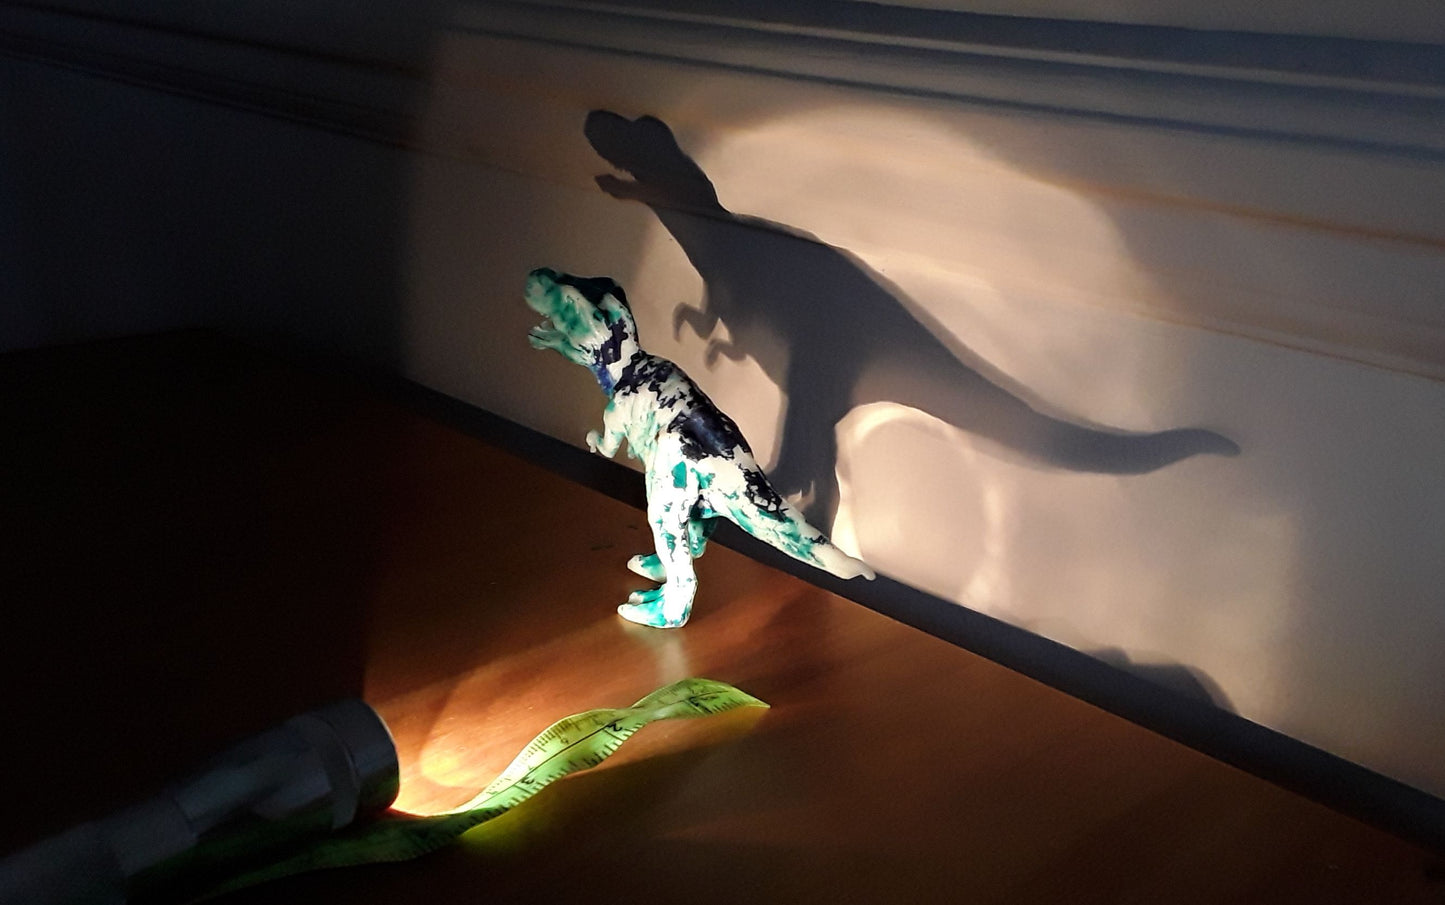 KS2 Light Shadows And Reflections Activities